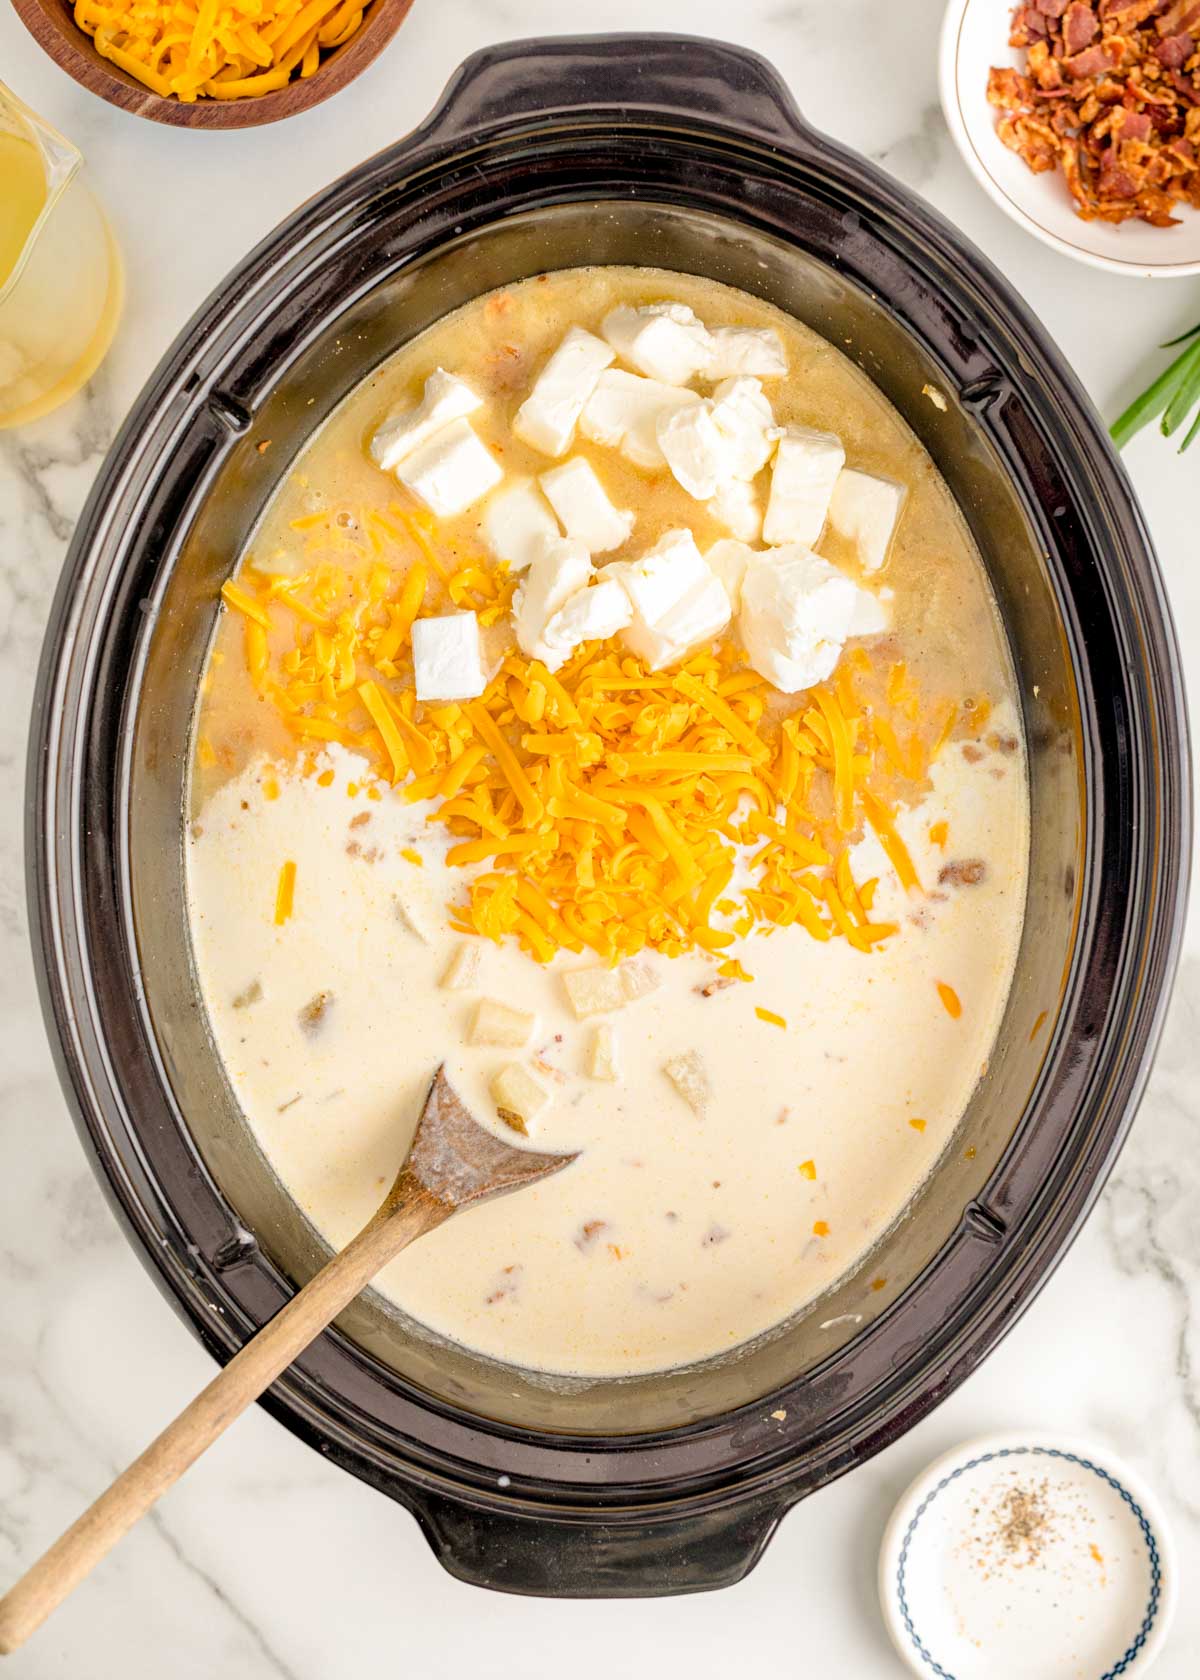 Cheese and heavy cream being added to a crockpot with potato soup.